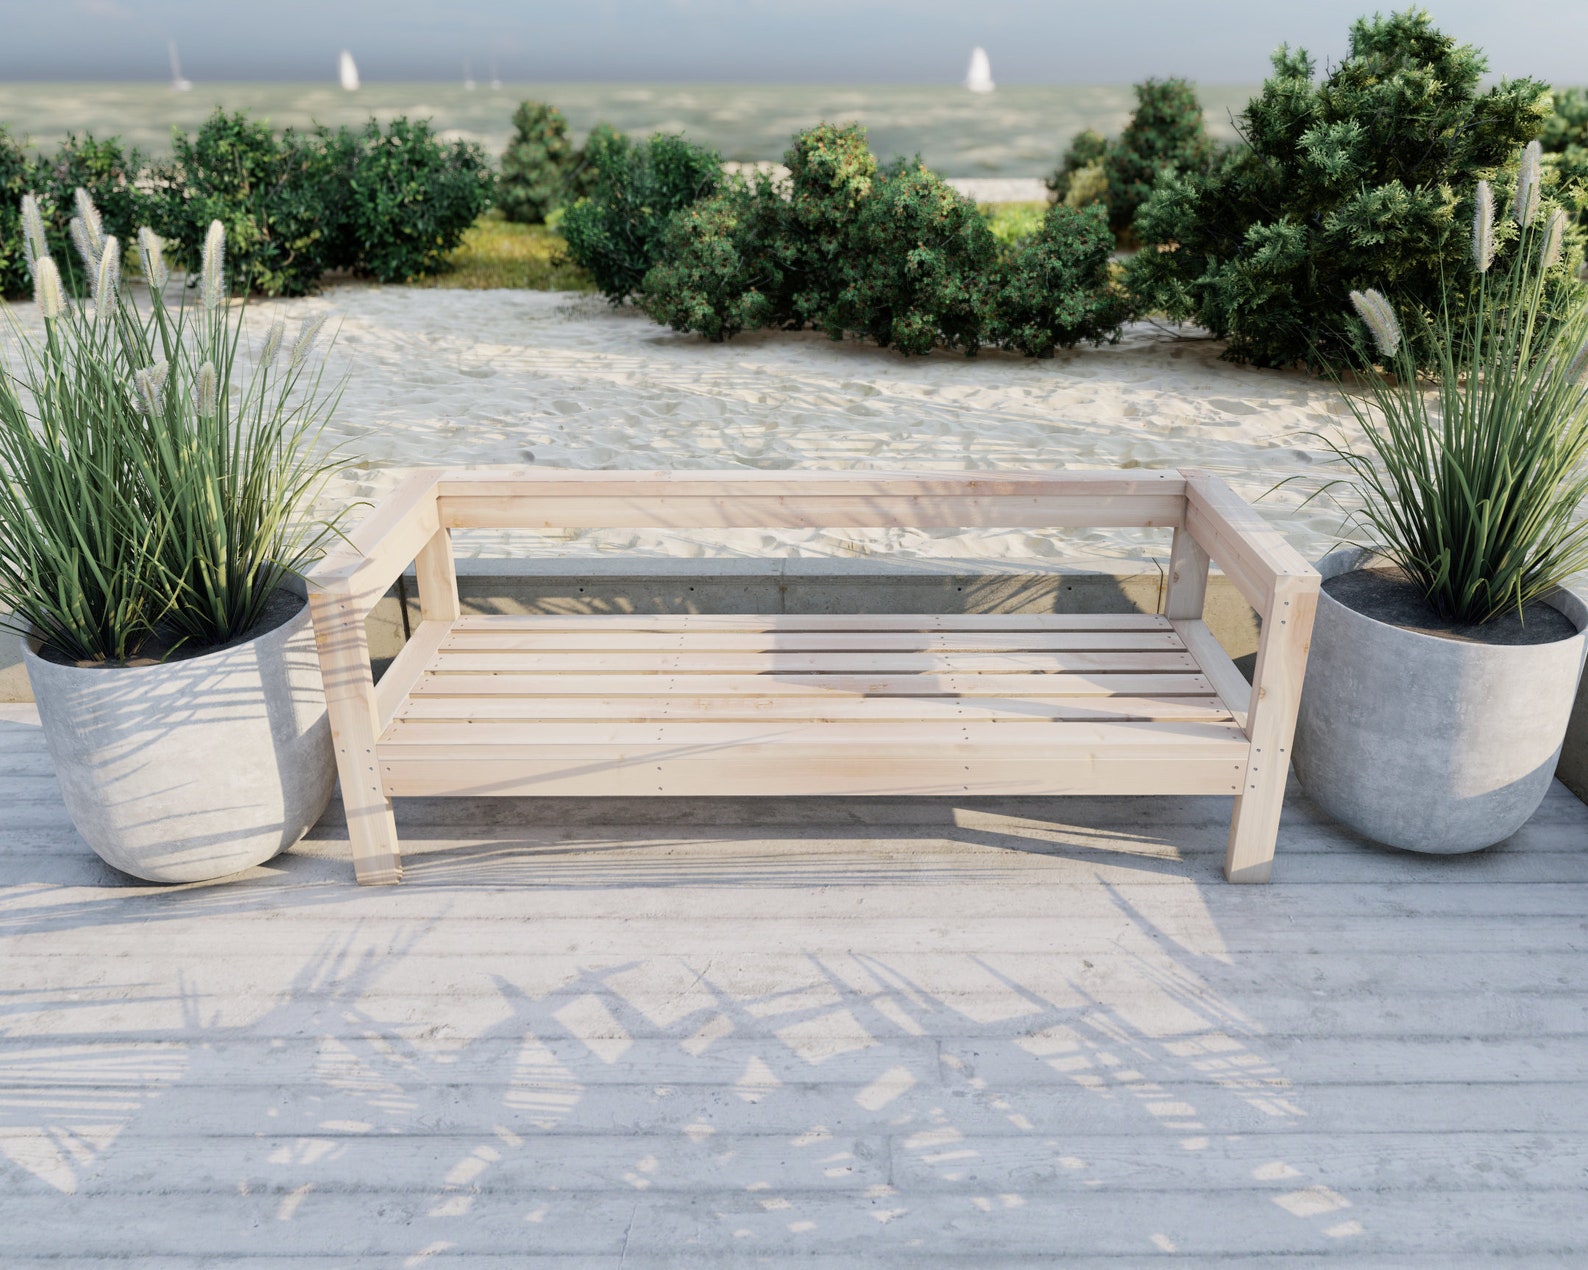 outdoor bench plans